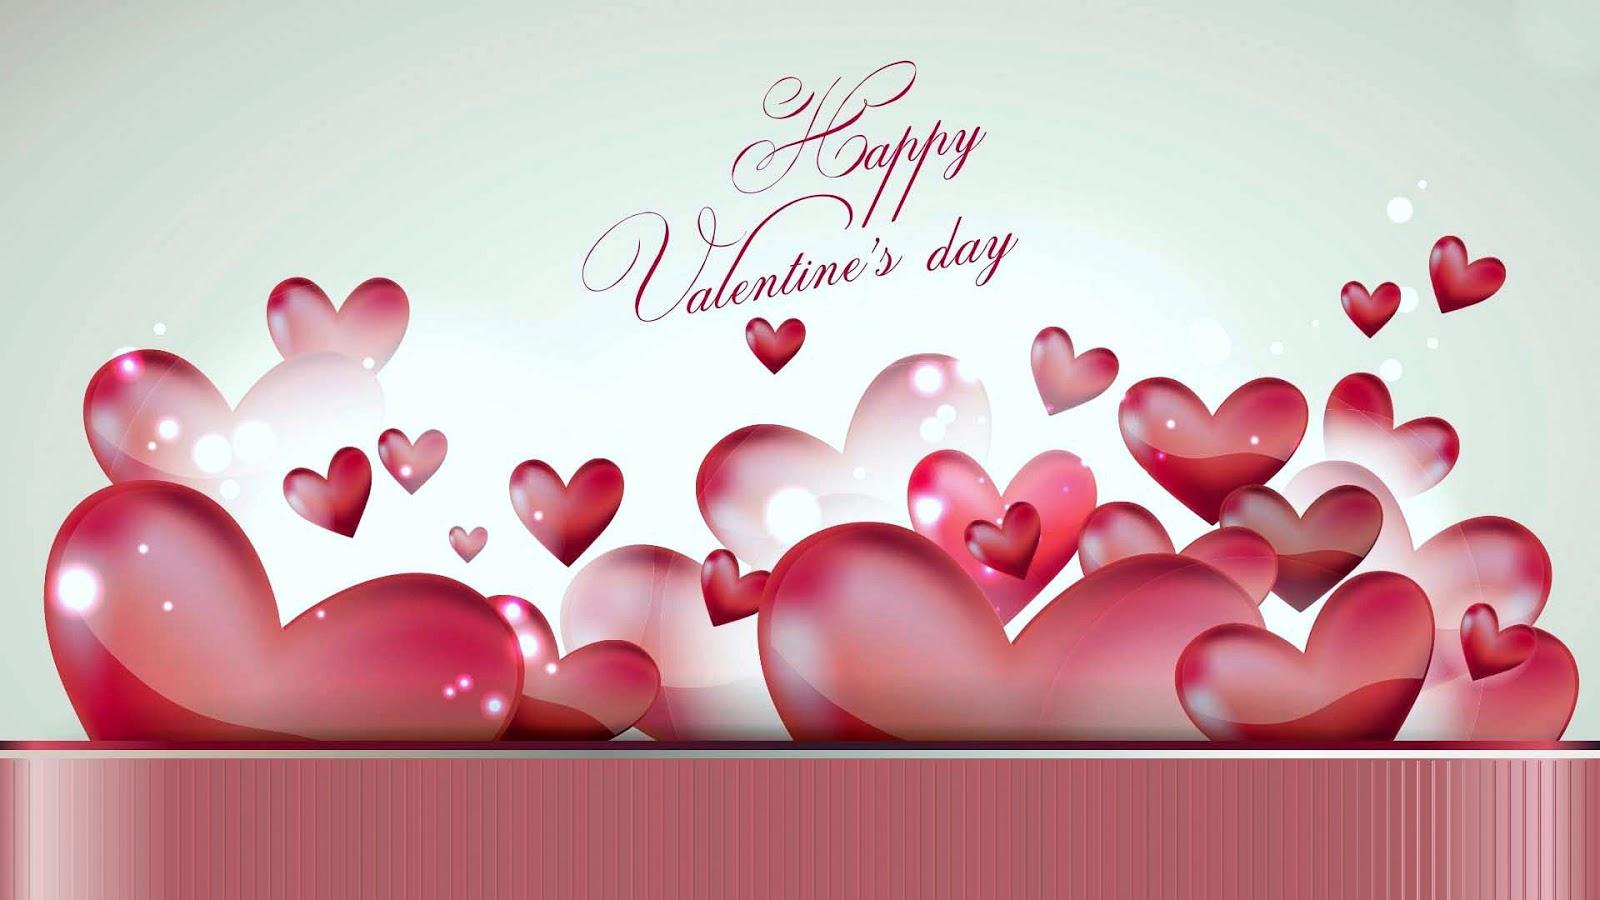 14th February Valentines Day Wishing Cards Image Picture